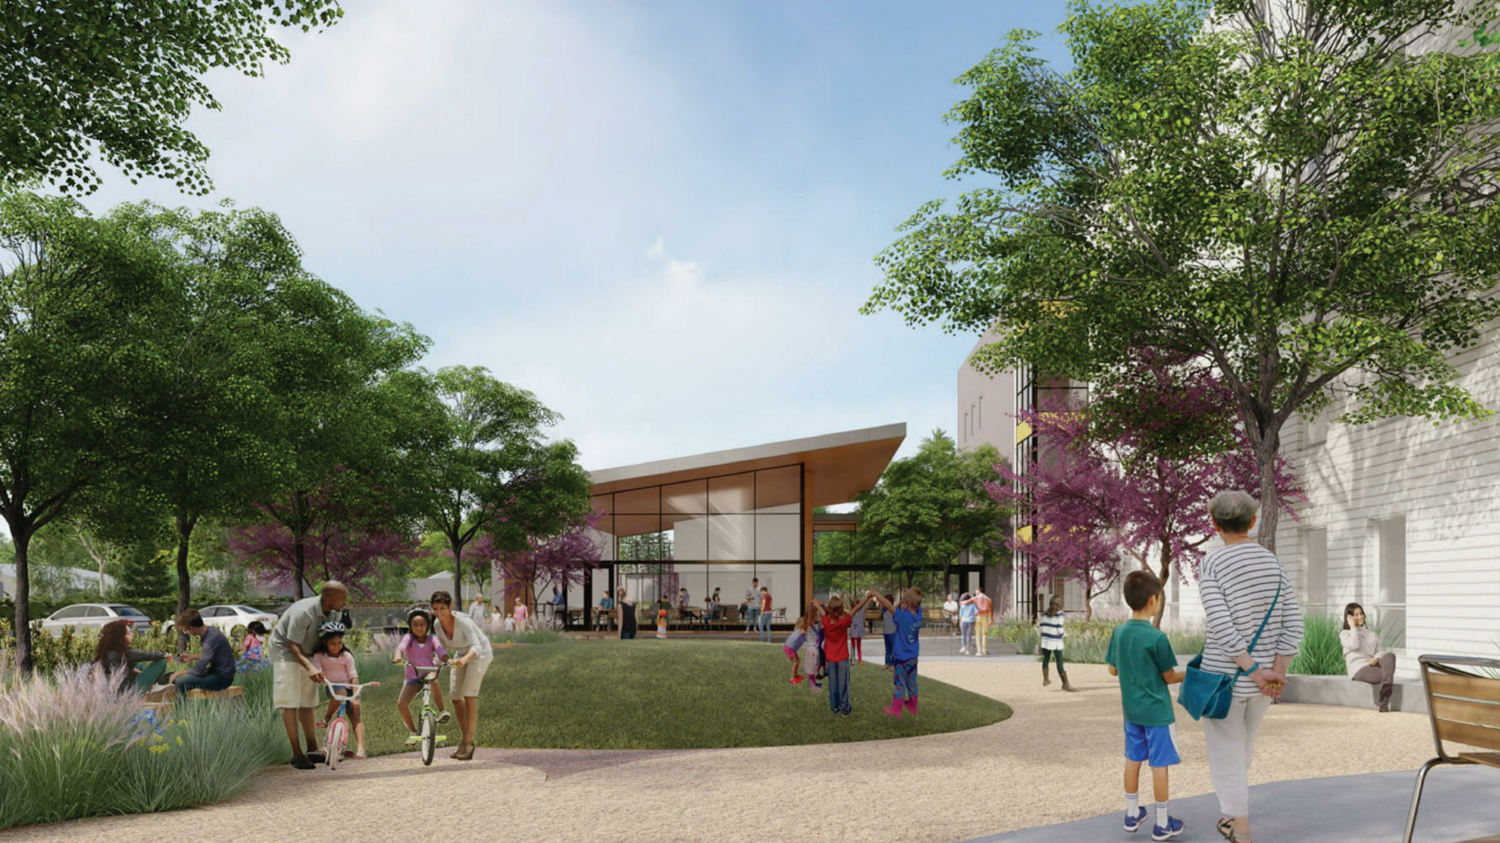 1345 Willow Road community space, rendering by Mithun